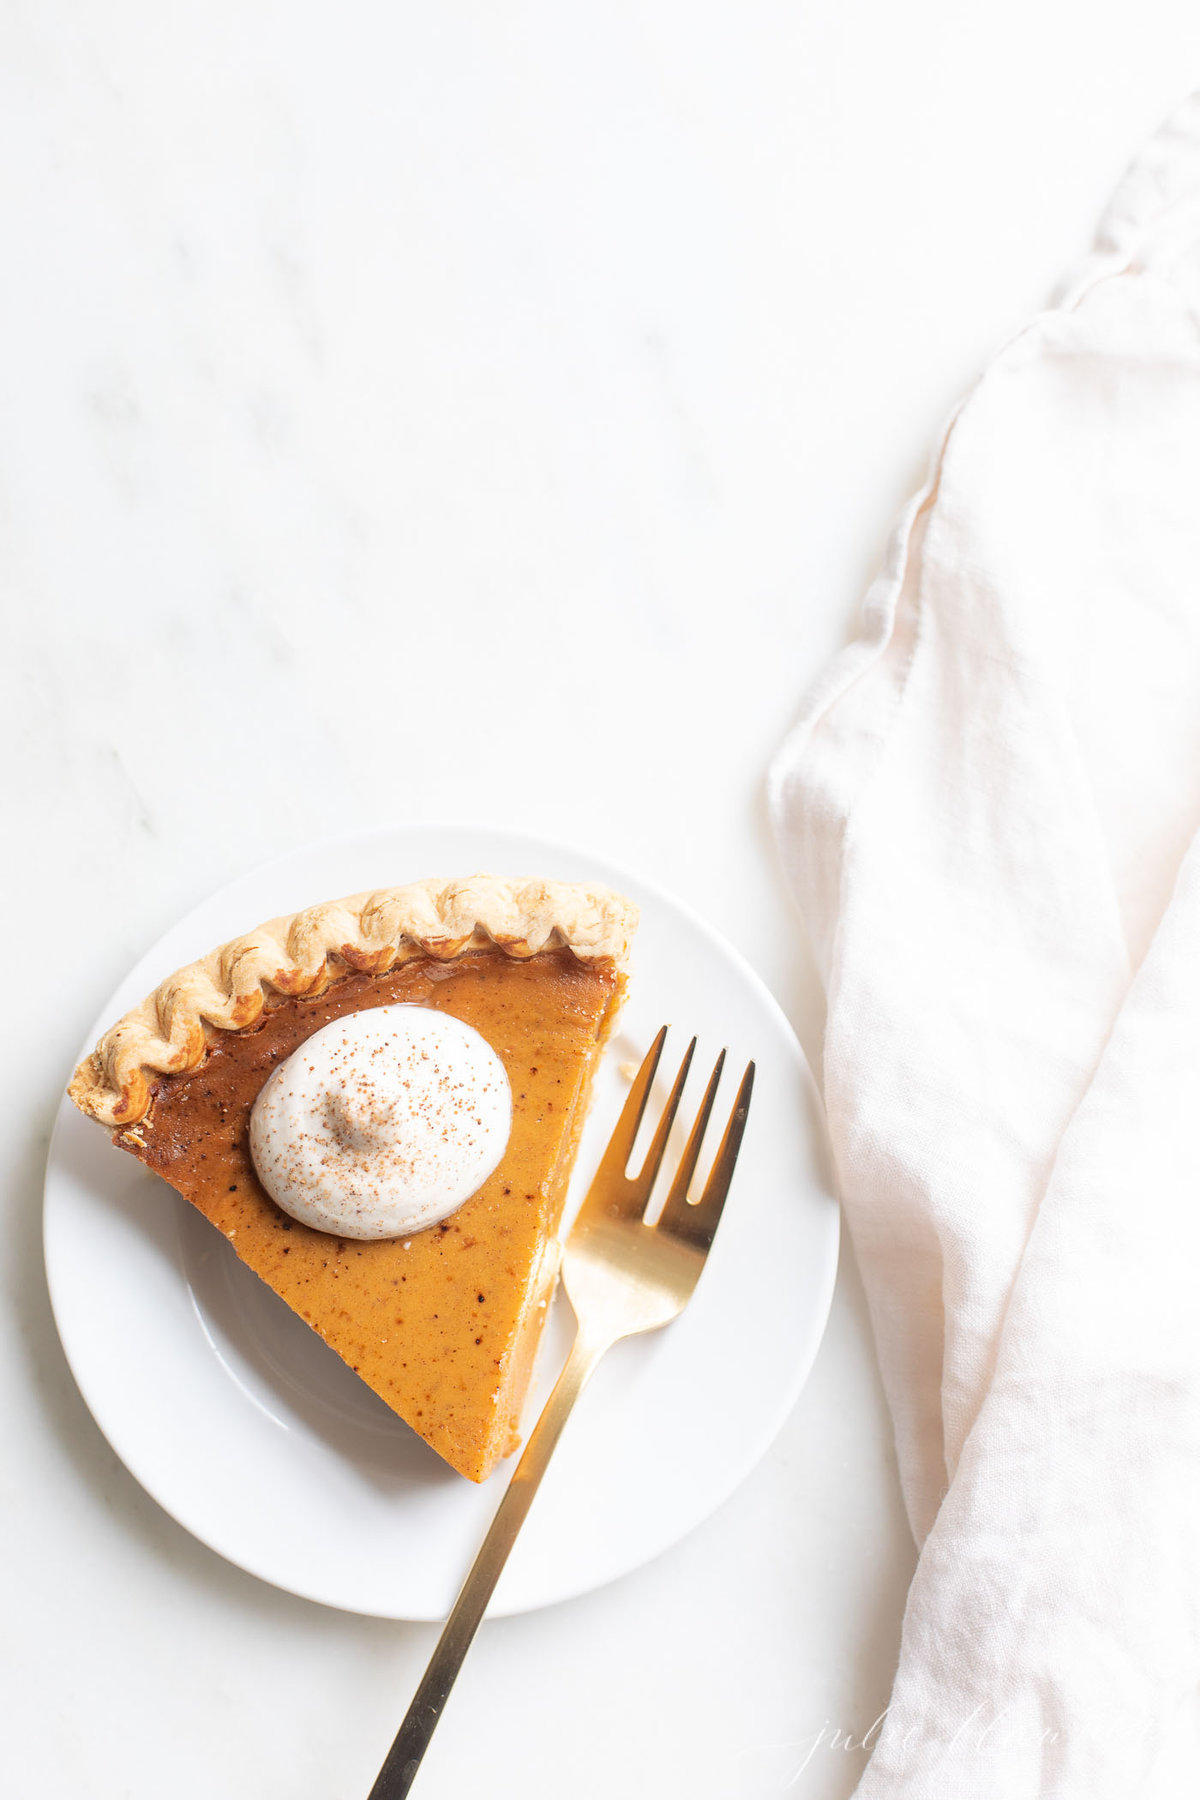 A slice of pumpkin pie with a dollop of eggnog whipped cream on top.  